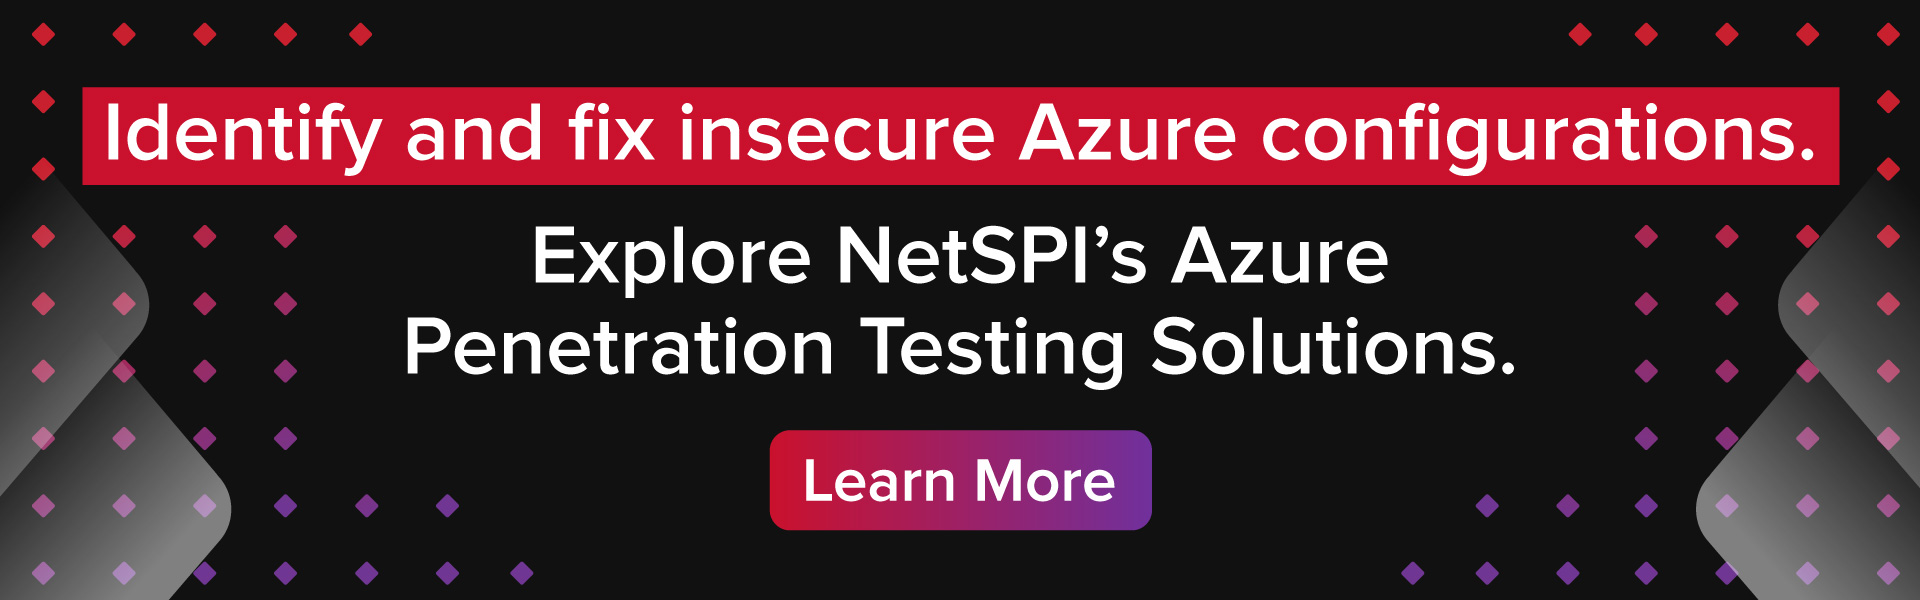 Identify and fix insecure Azure configurations. Explore NetSPI’s Azure Penetration Testing solutions.